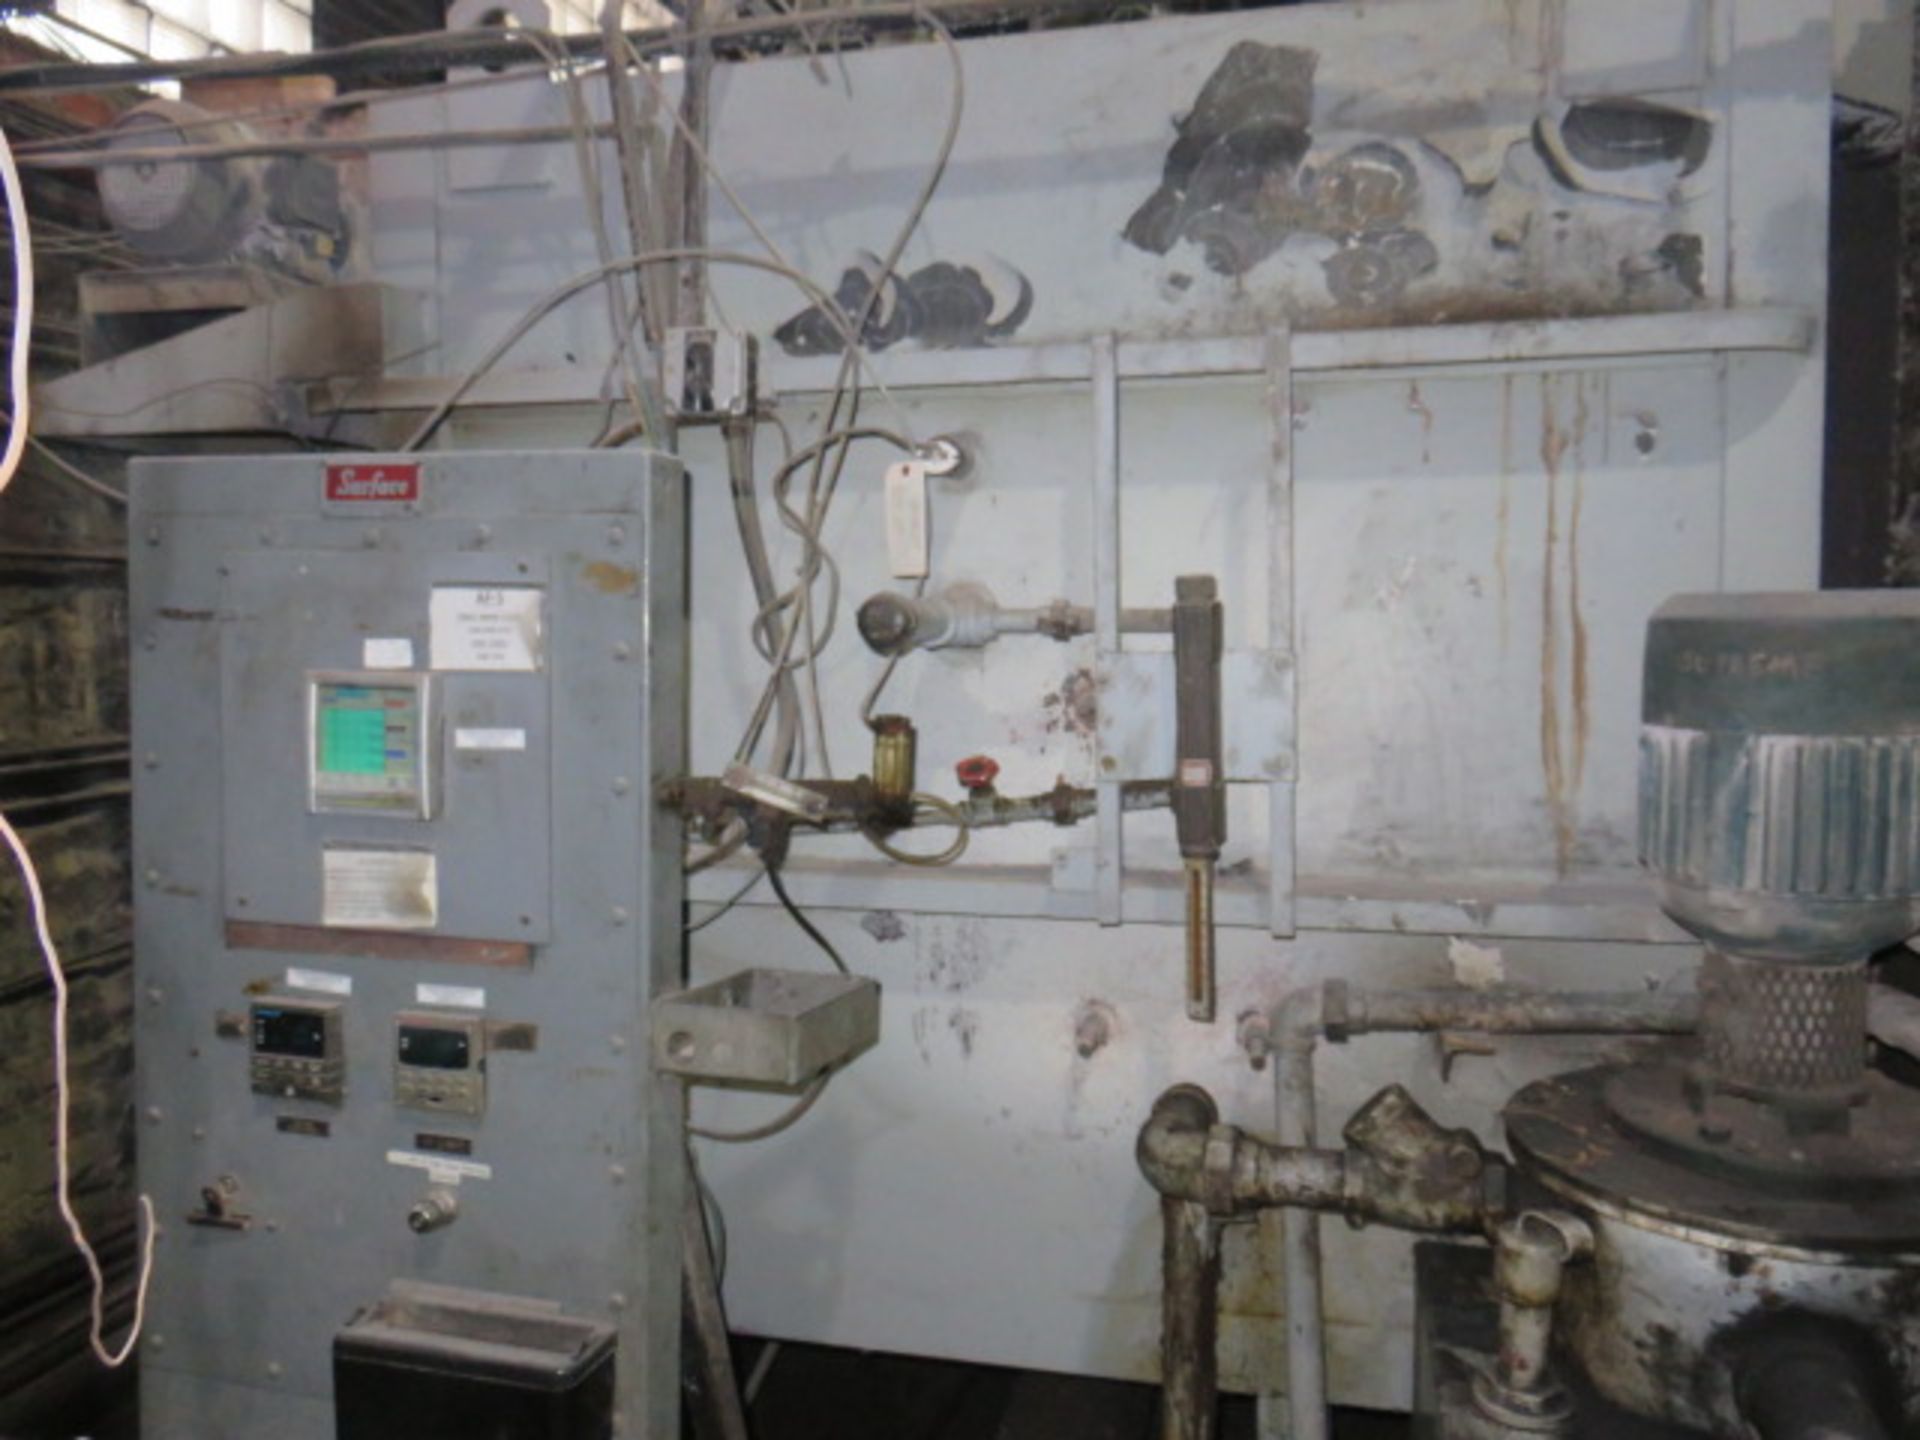 SURFACE COMBUSTION Power Convection AllCase Controlled Atmosphere Furnace, S/N BC-37855-1,... - Image 5 of 8